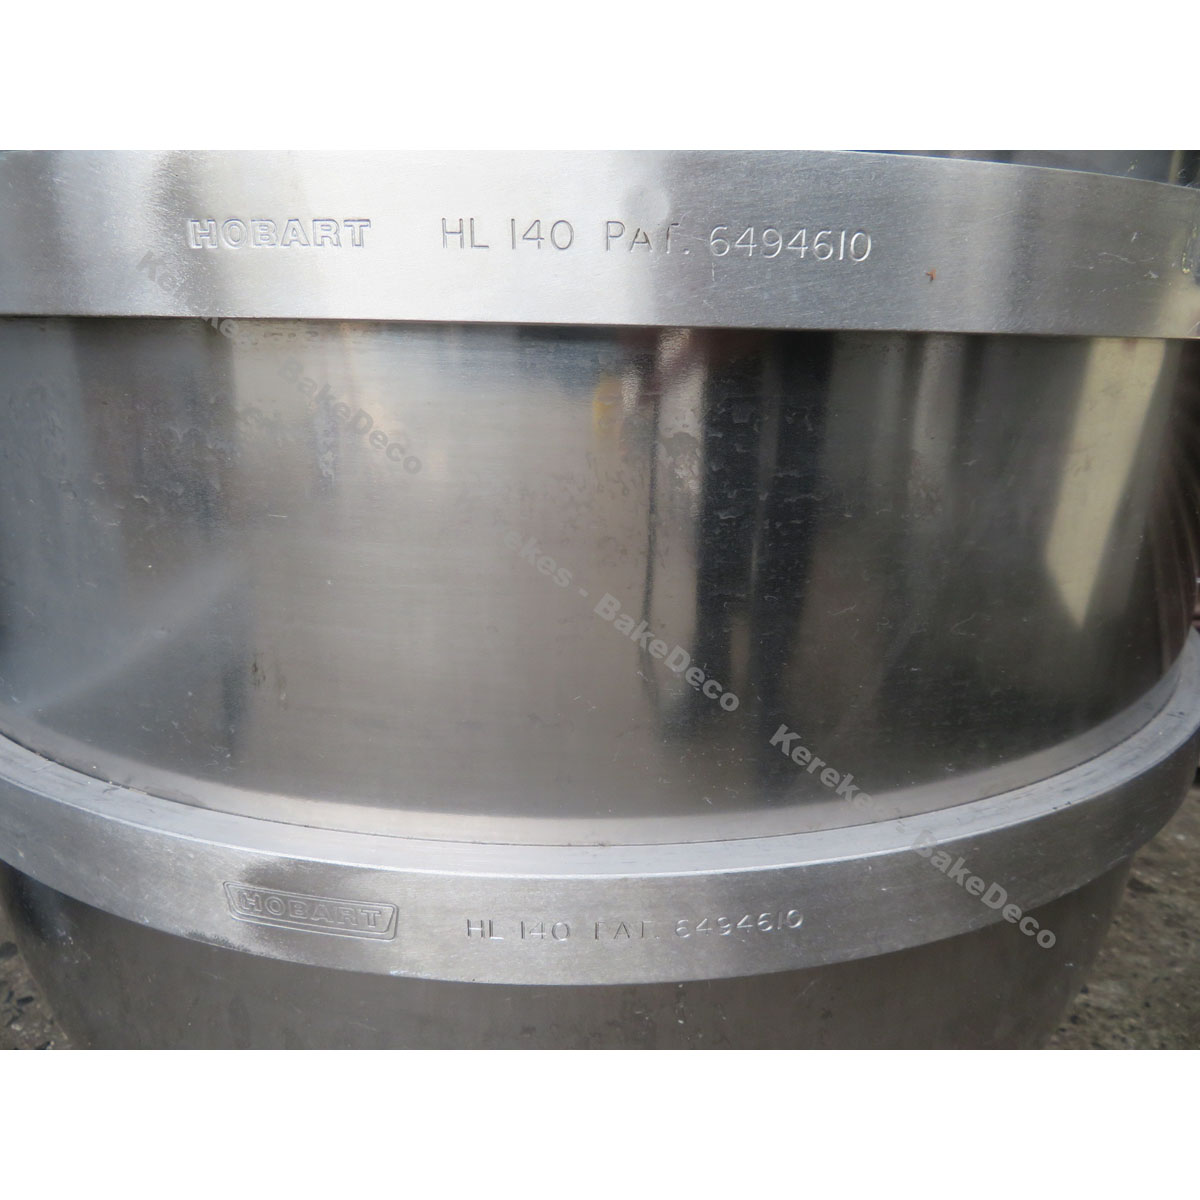 Hobart BOWL-HL140 140 Quart Stainless Steel Bowl for HL1400 Mixer, Used Great Condition image 2